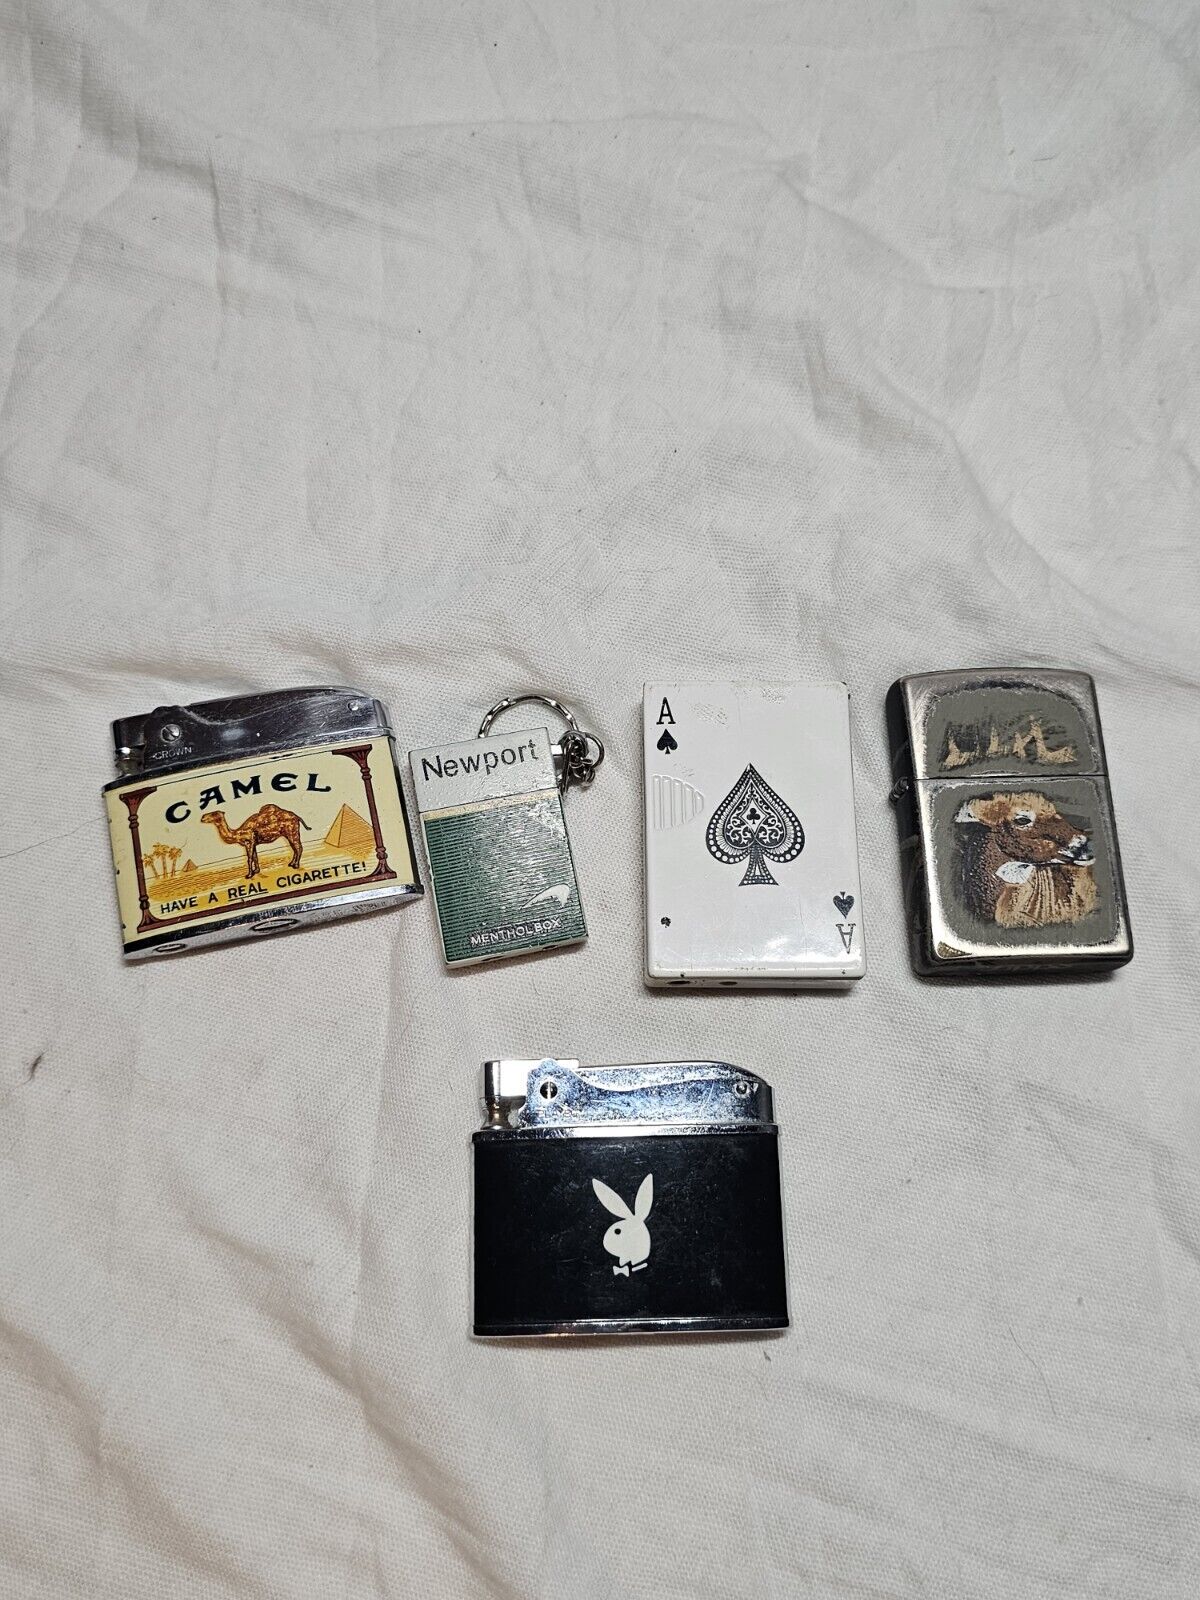 Lot of five zippo and other brand lighters